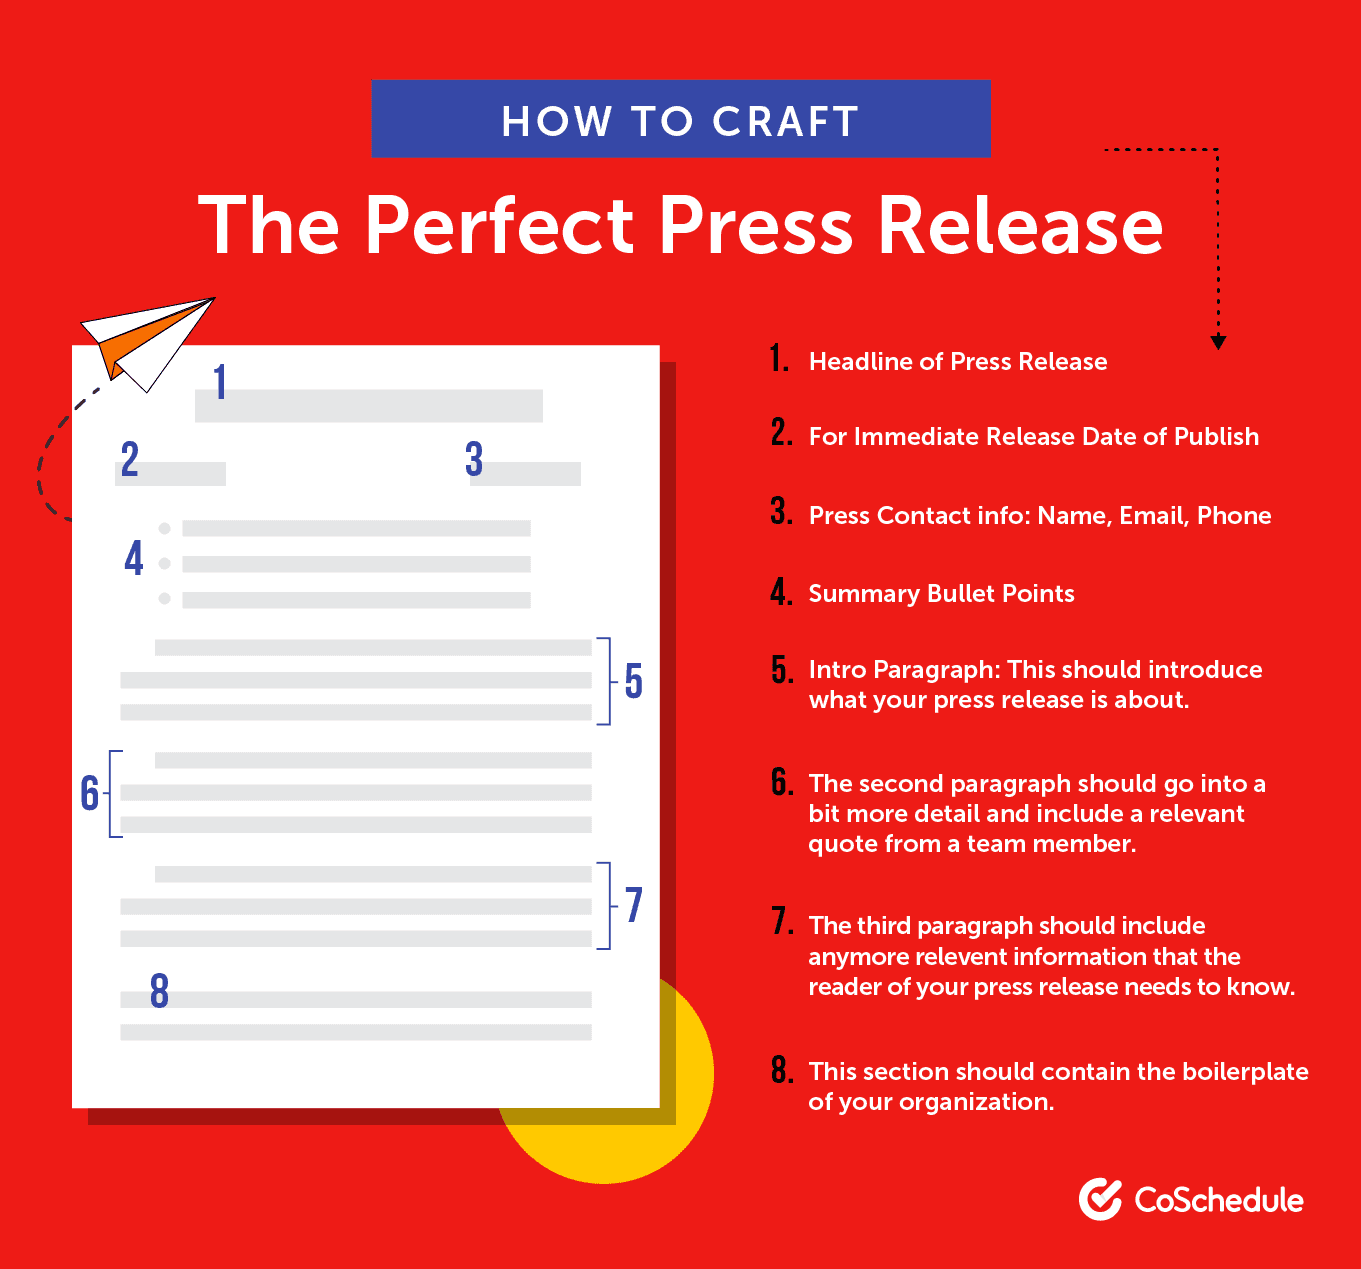 List of 8 steps on how to craft the perfect press release.